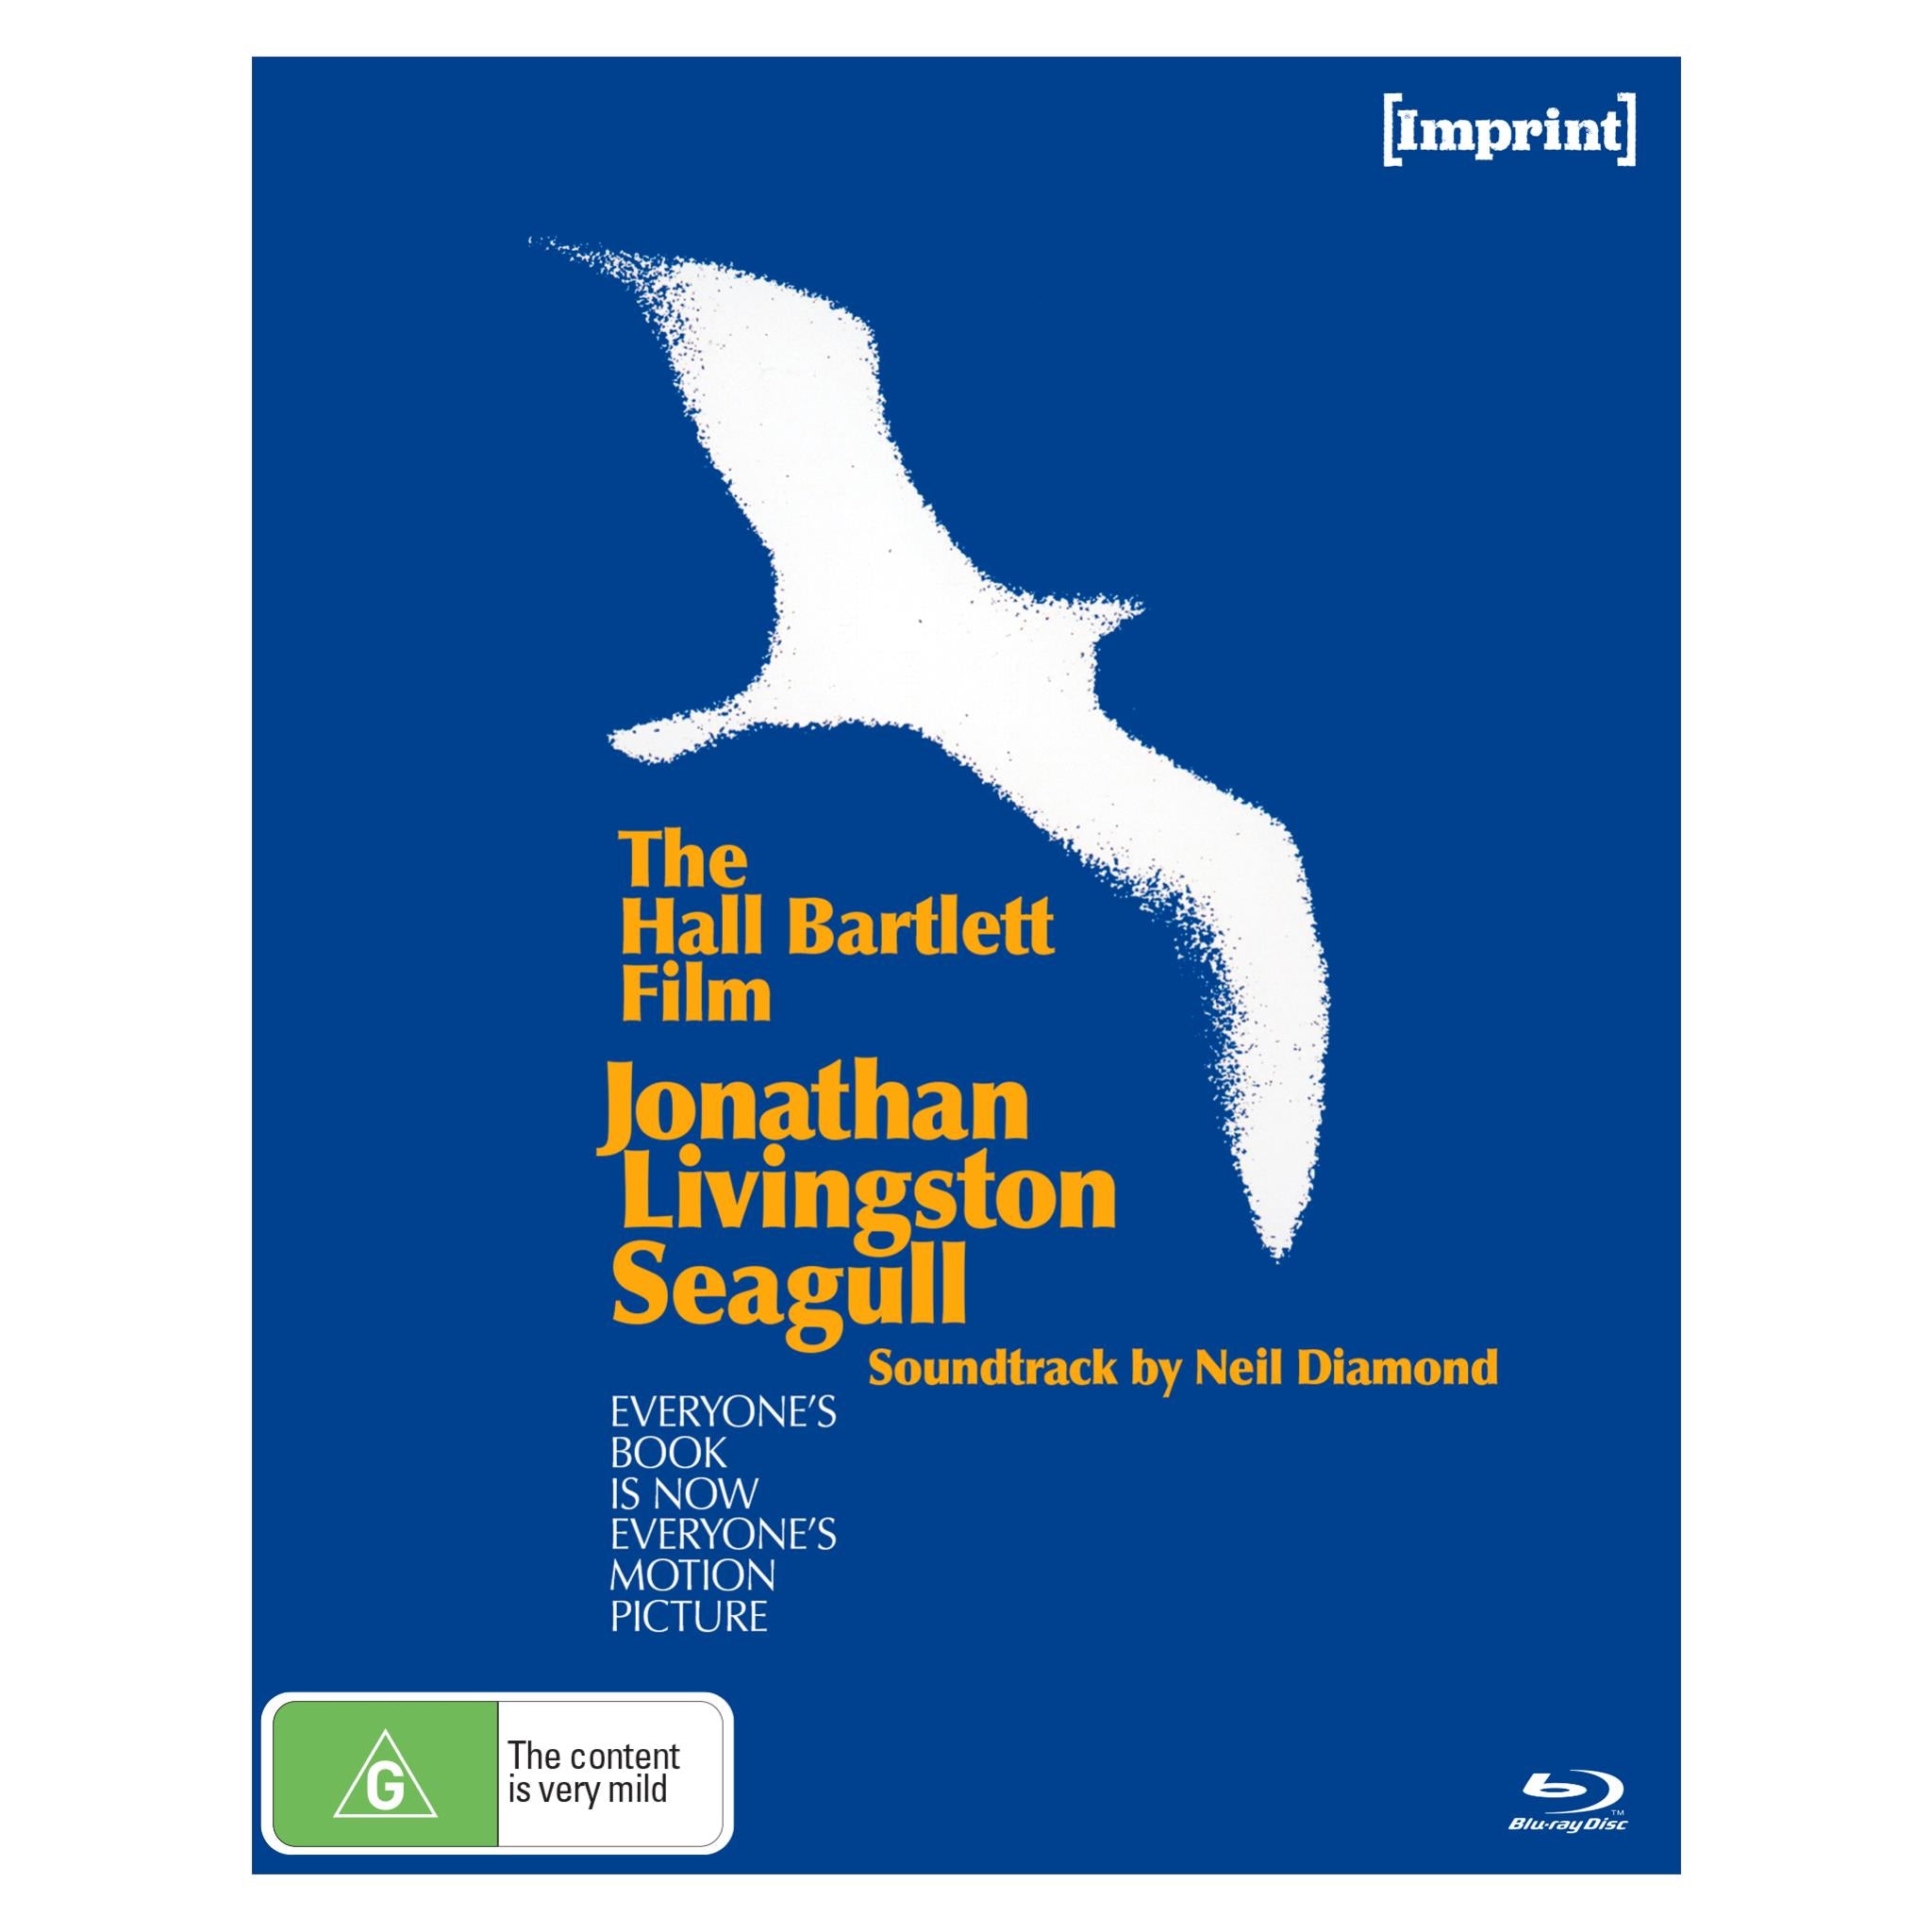 jonathan livingston seagull (imprint collection special edition)